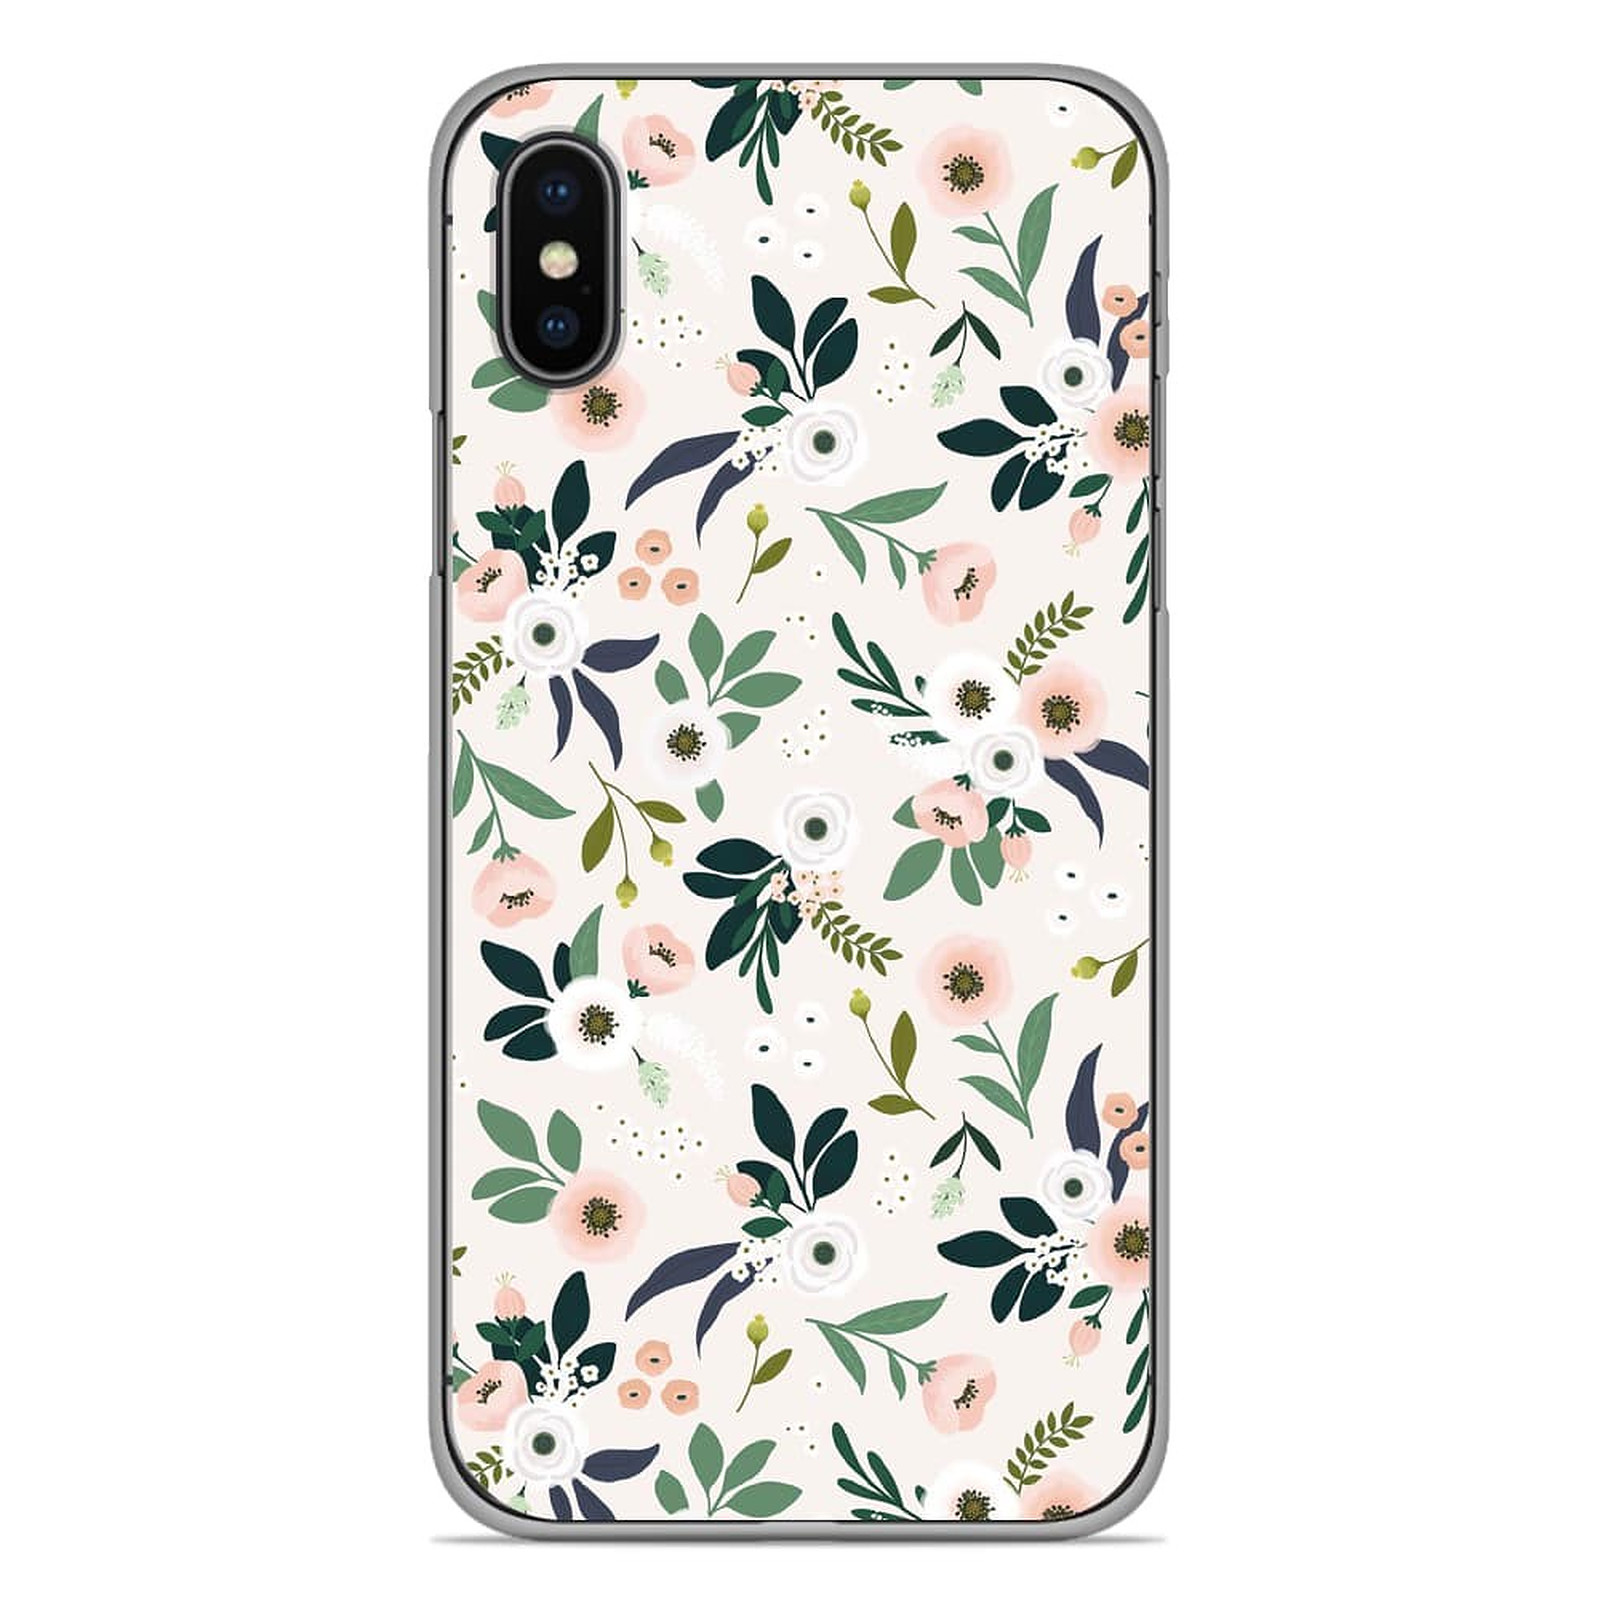 1001 Coques Coque silicone gel Apple iPhone XS Max motif Flowers - Coque telephone 1001Coques